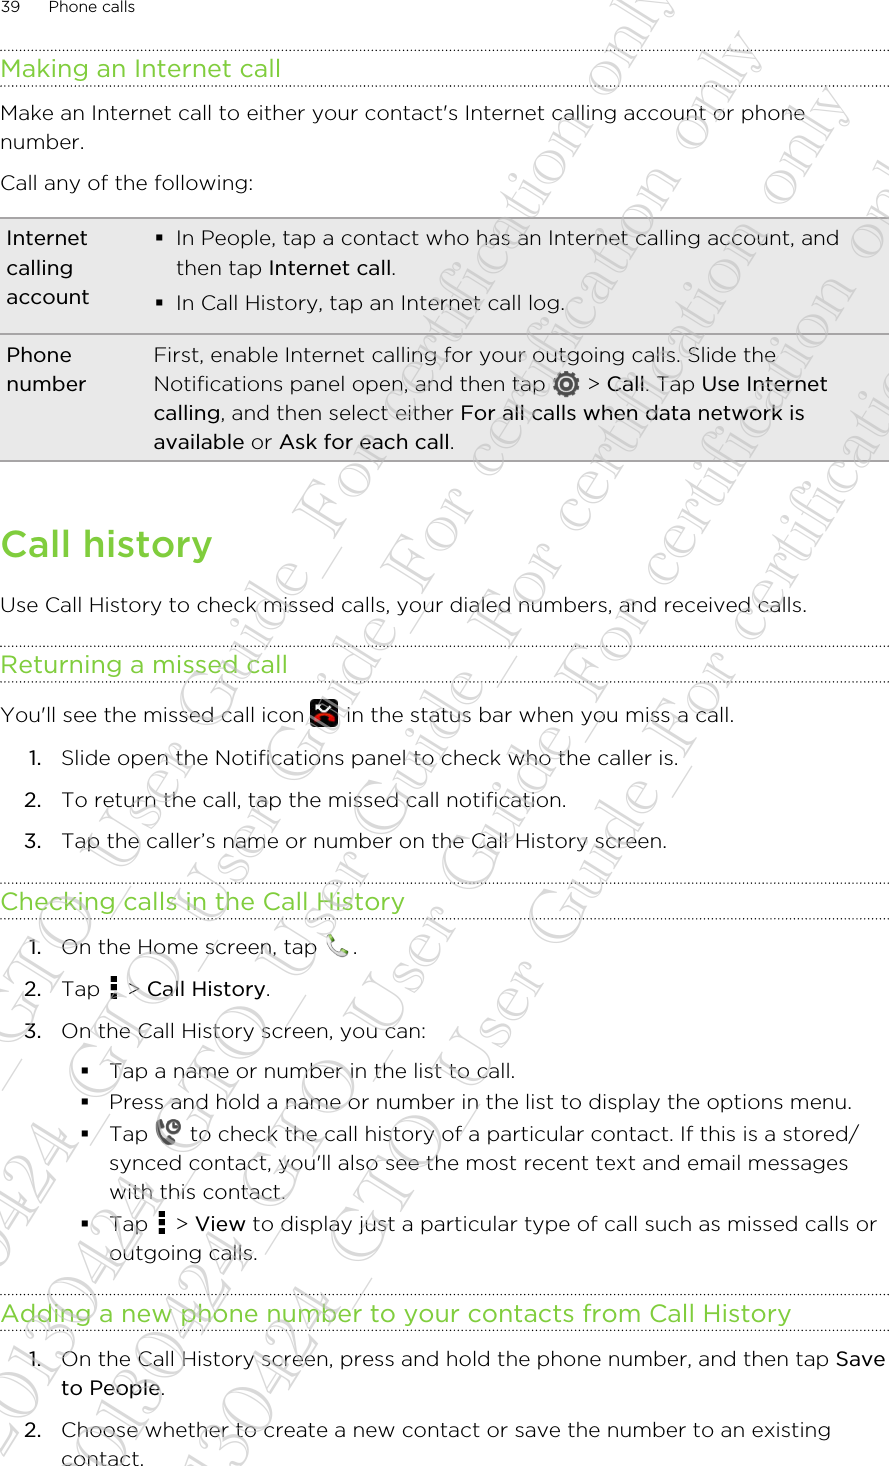 Making an Internet callMake an Internet call to either your contact&apos;s Internet calling account or phonenumber.Call any of the following:Internetcallingaccount§In People, tap a contact who has an Internet calling account, andthen tap Internet call.§In Call History, tap an Internet call log.PhonenumberFirst, enable Internet calling for your outgoing calls. Slide theNotifications panel open, and then tap   &gt; Call. Tap Use Internetcalling, and then select either For all calls when data network isavailable or Ask for each call.Call historyUse Call History to check missed calls, your dialed numbers, and received calls.Returning a missed callYou&apos;ll see the missed call icon   in the status bar when you miss a call.1. Slide open the Notifications panel to check who the caller is.2. To return the call, tap the missed call notification.3. Tap the caller’s name or number on the Call History screen.Checking calls in the Call History1. On the Home screen, tap  .2. Tap   &gt; Call History.3. On the Call History screen, you can:§Tap a name or number in the list to call.§Press and hold a name or number in the list to display the options menu.§Tap   to check the call history of a particular contact. If this is a stored/synced contact, you&apos;ll also see the most recent text and email messageswith this contact.§Tap   &gt; View to display just a particular type of call such as missed calls oroutgoing calls.Adding a new phone number to your contacts from Call History1. On the Call History screen, press and hold the phone number, and then tap Saveto People.2. Choose whether to create a new contact or save the number to an existingcontact.39 Phone calls20130424_GTO_User Guide_For certification only 20130424_GTO_User Guide_For certification only 20130424_GTO_User Guide_For certification only 20130424_GTO_User Guide_For certification only 20130424_GTO_User Guide_For certification only